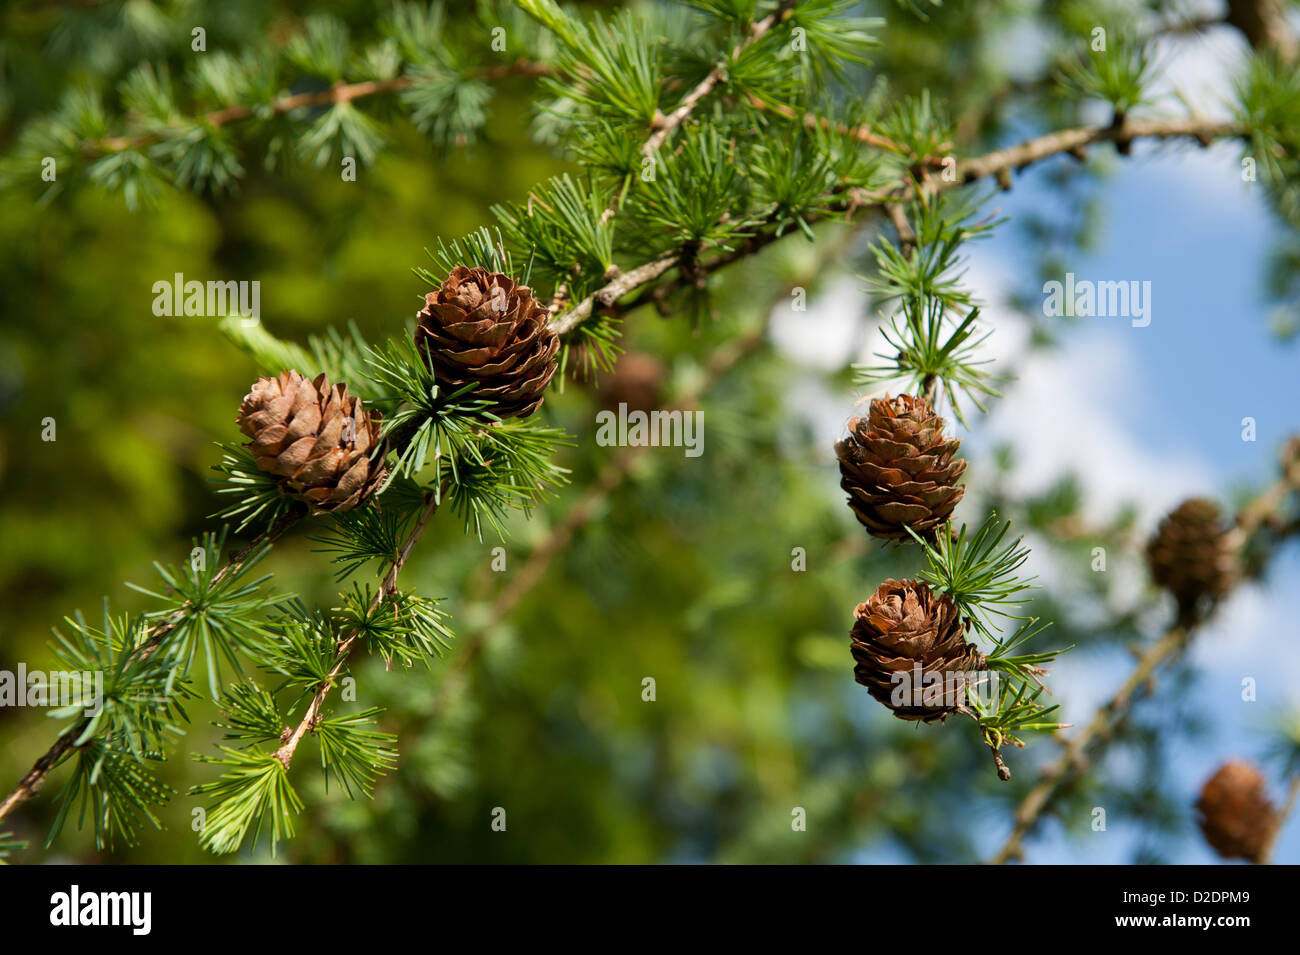 Larix polonica or Larch small cones on twig Stock Photo